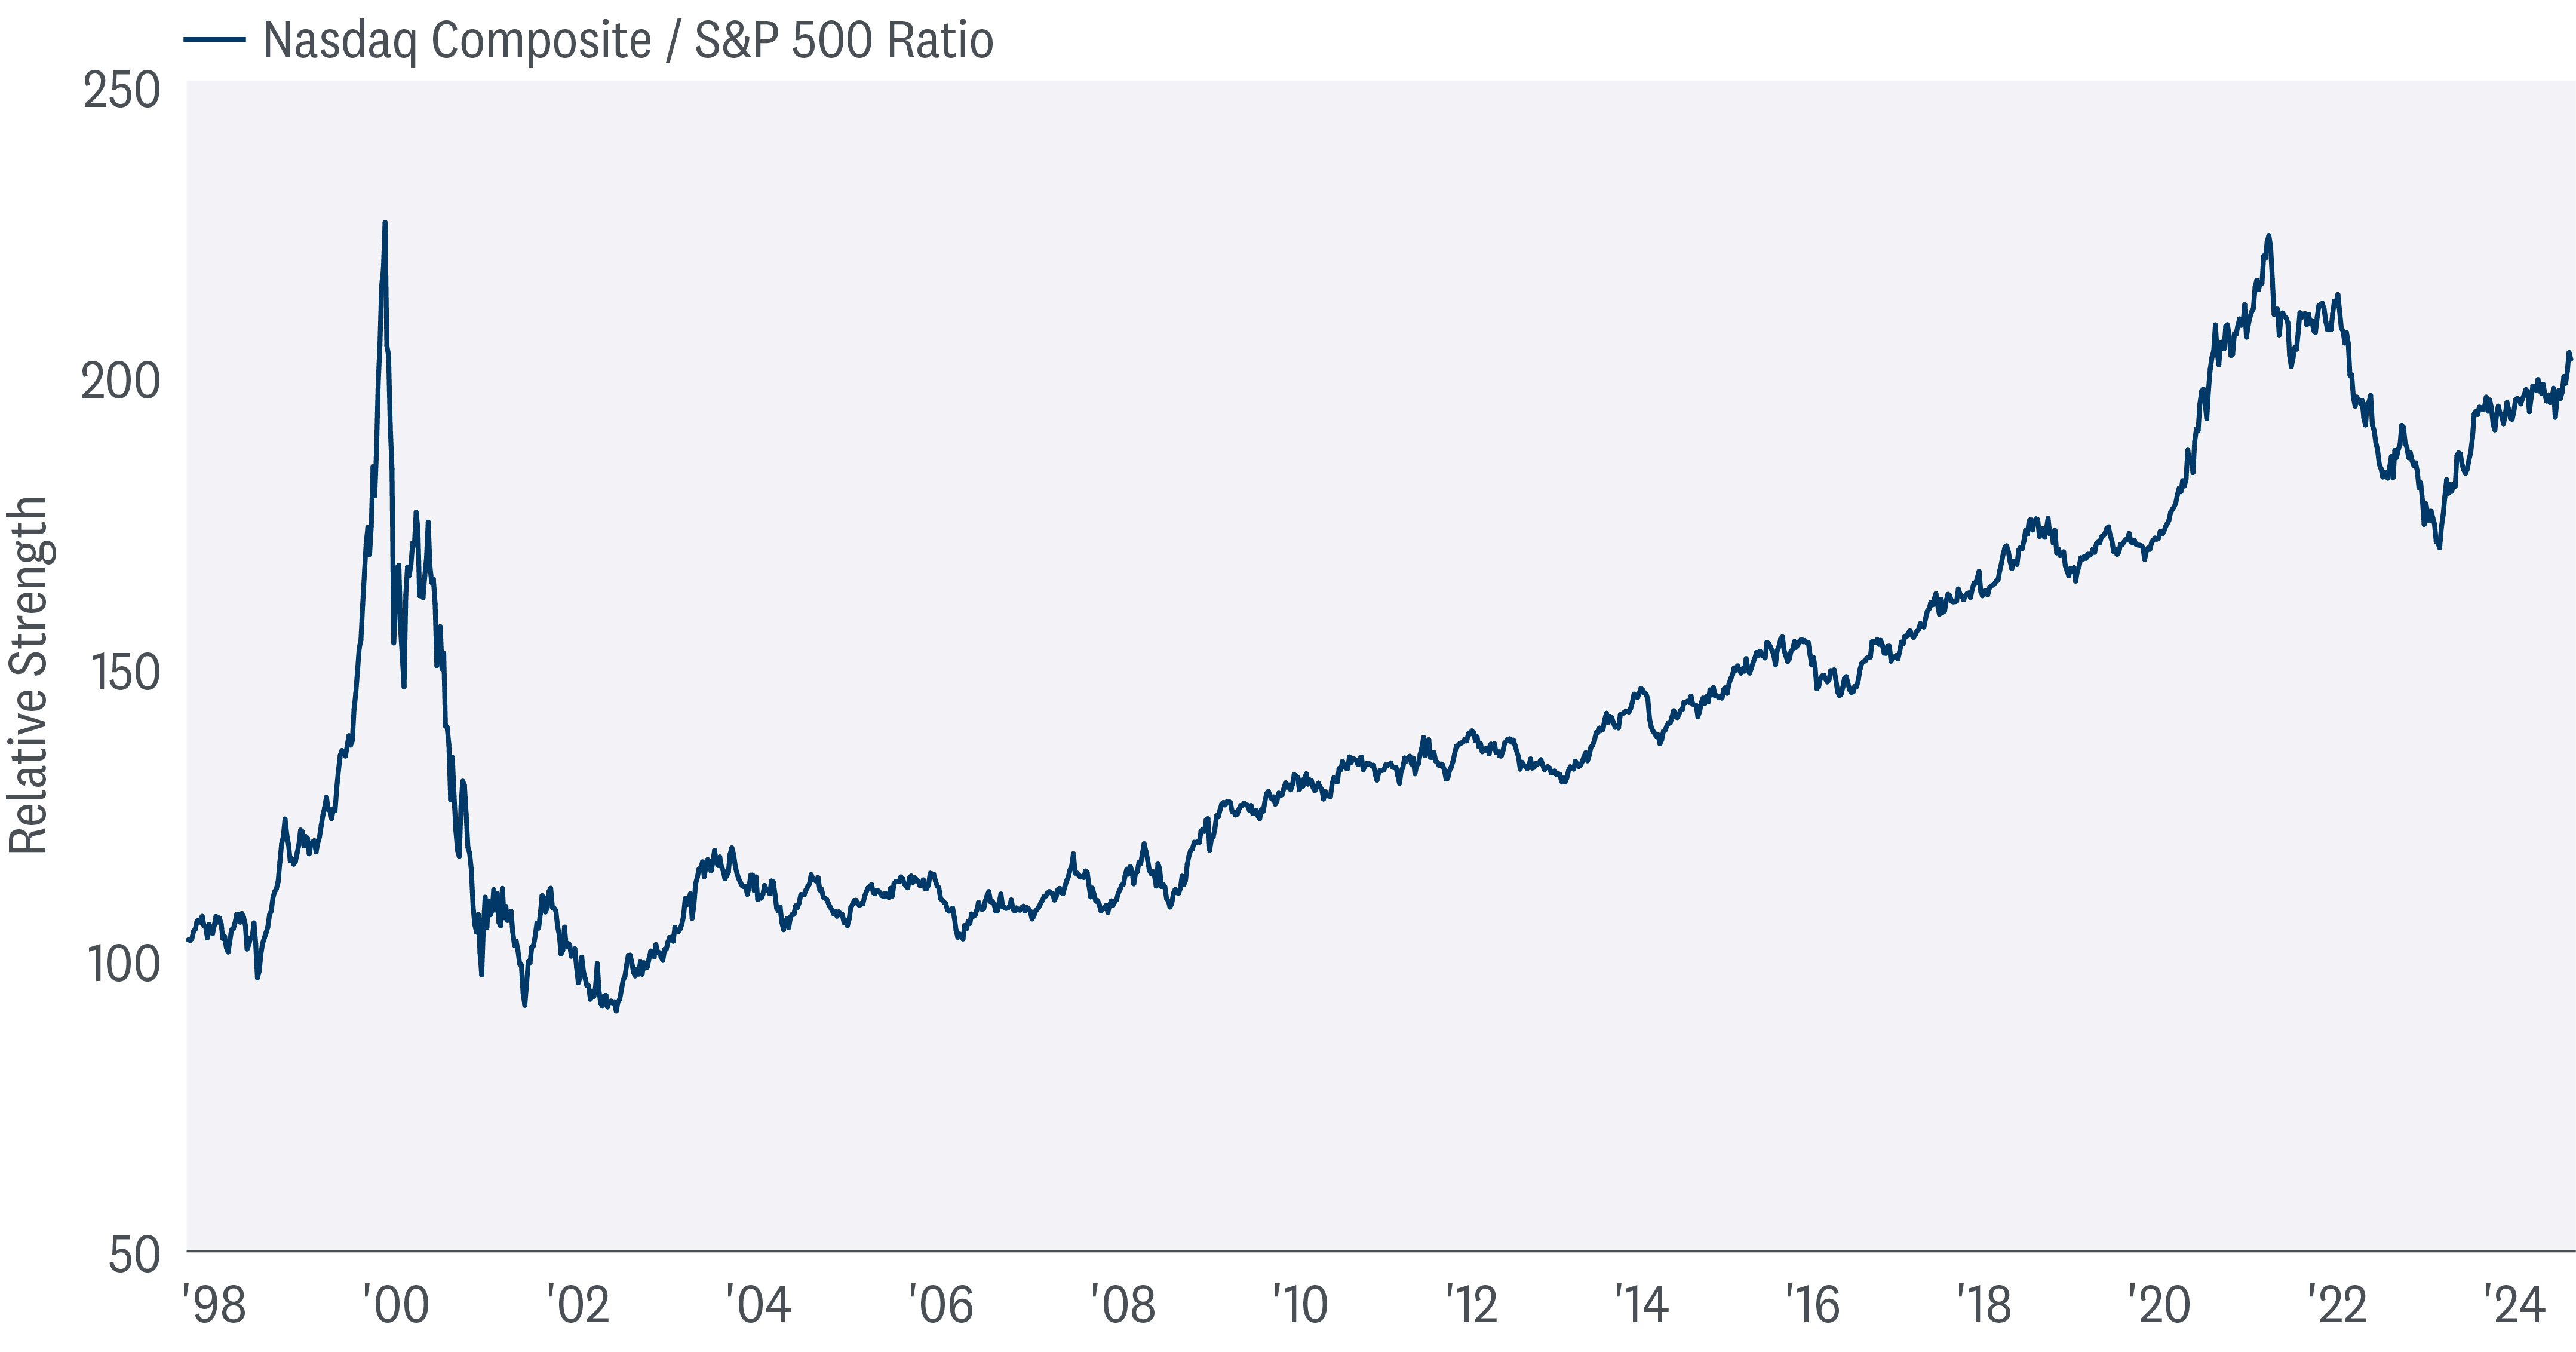 Line graph of the relative strength of the Nasdaq Composite /S&P 500 ratio from 1998 to 2024 